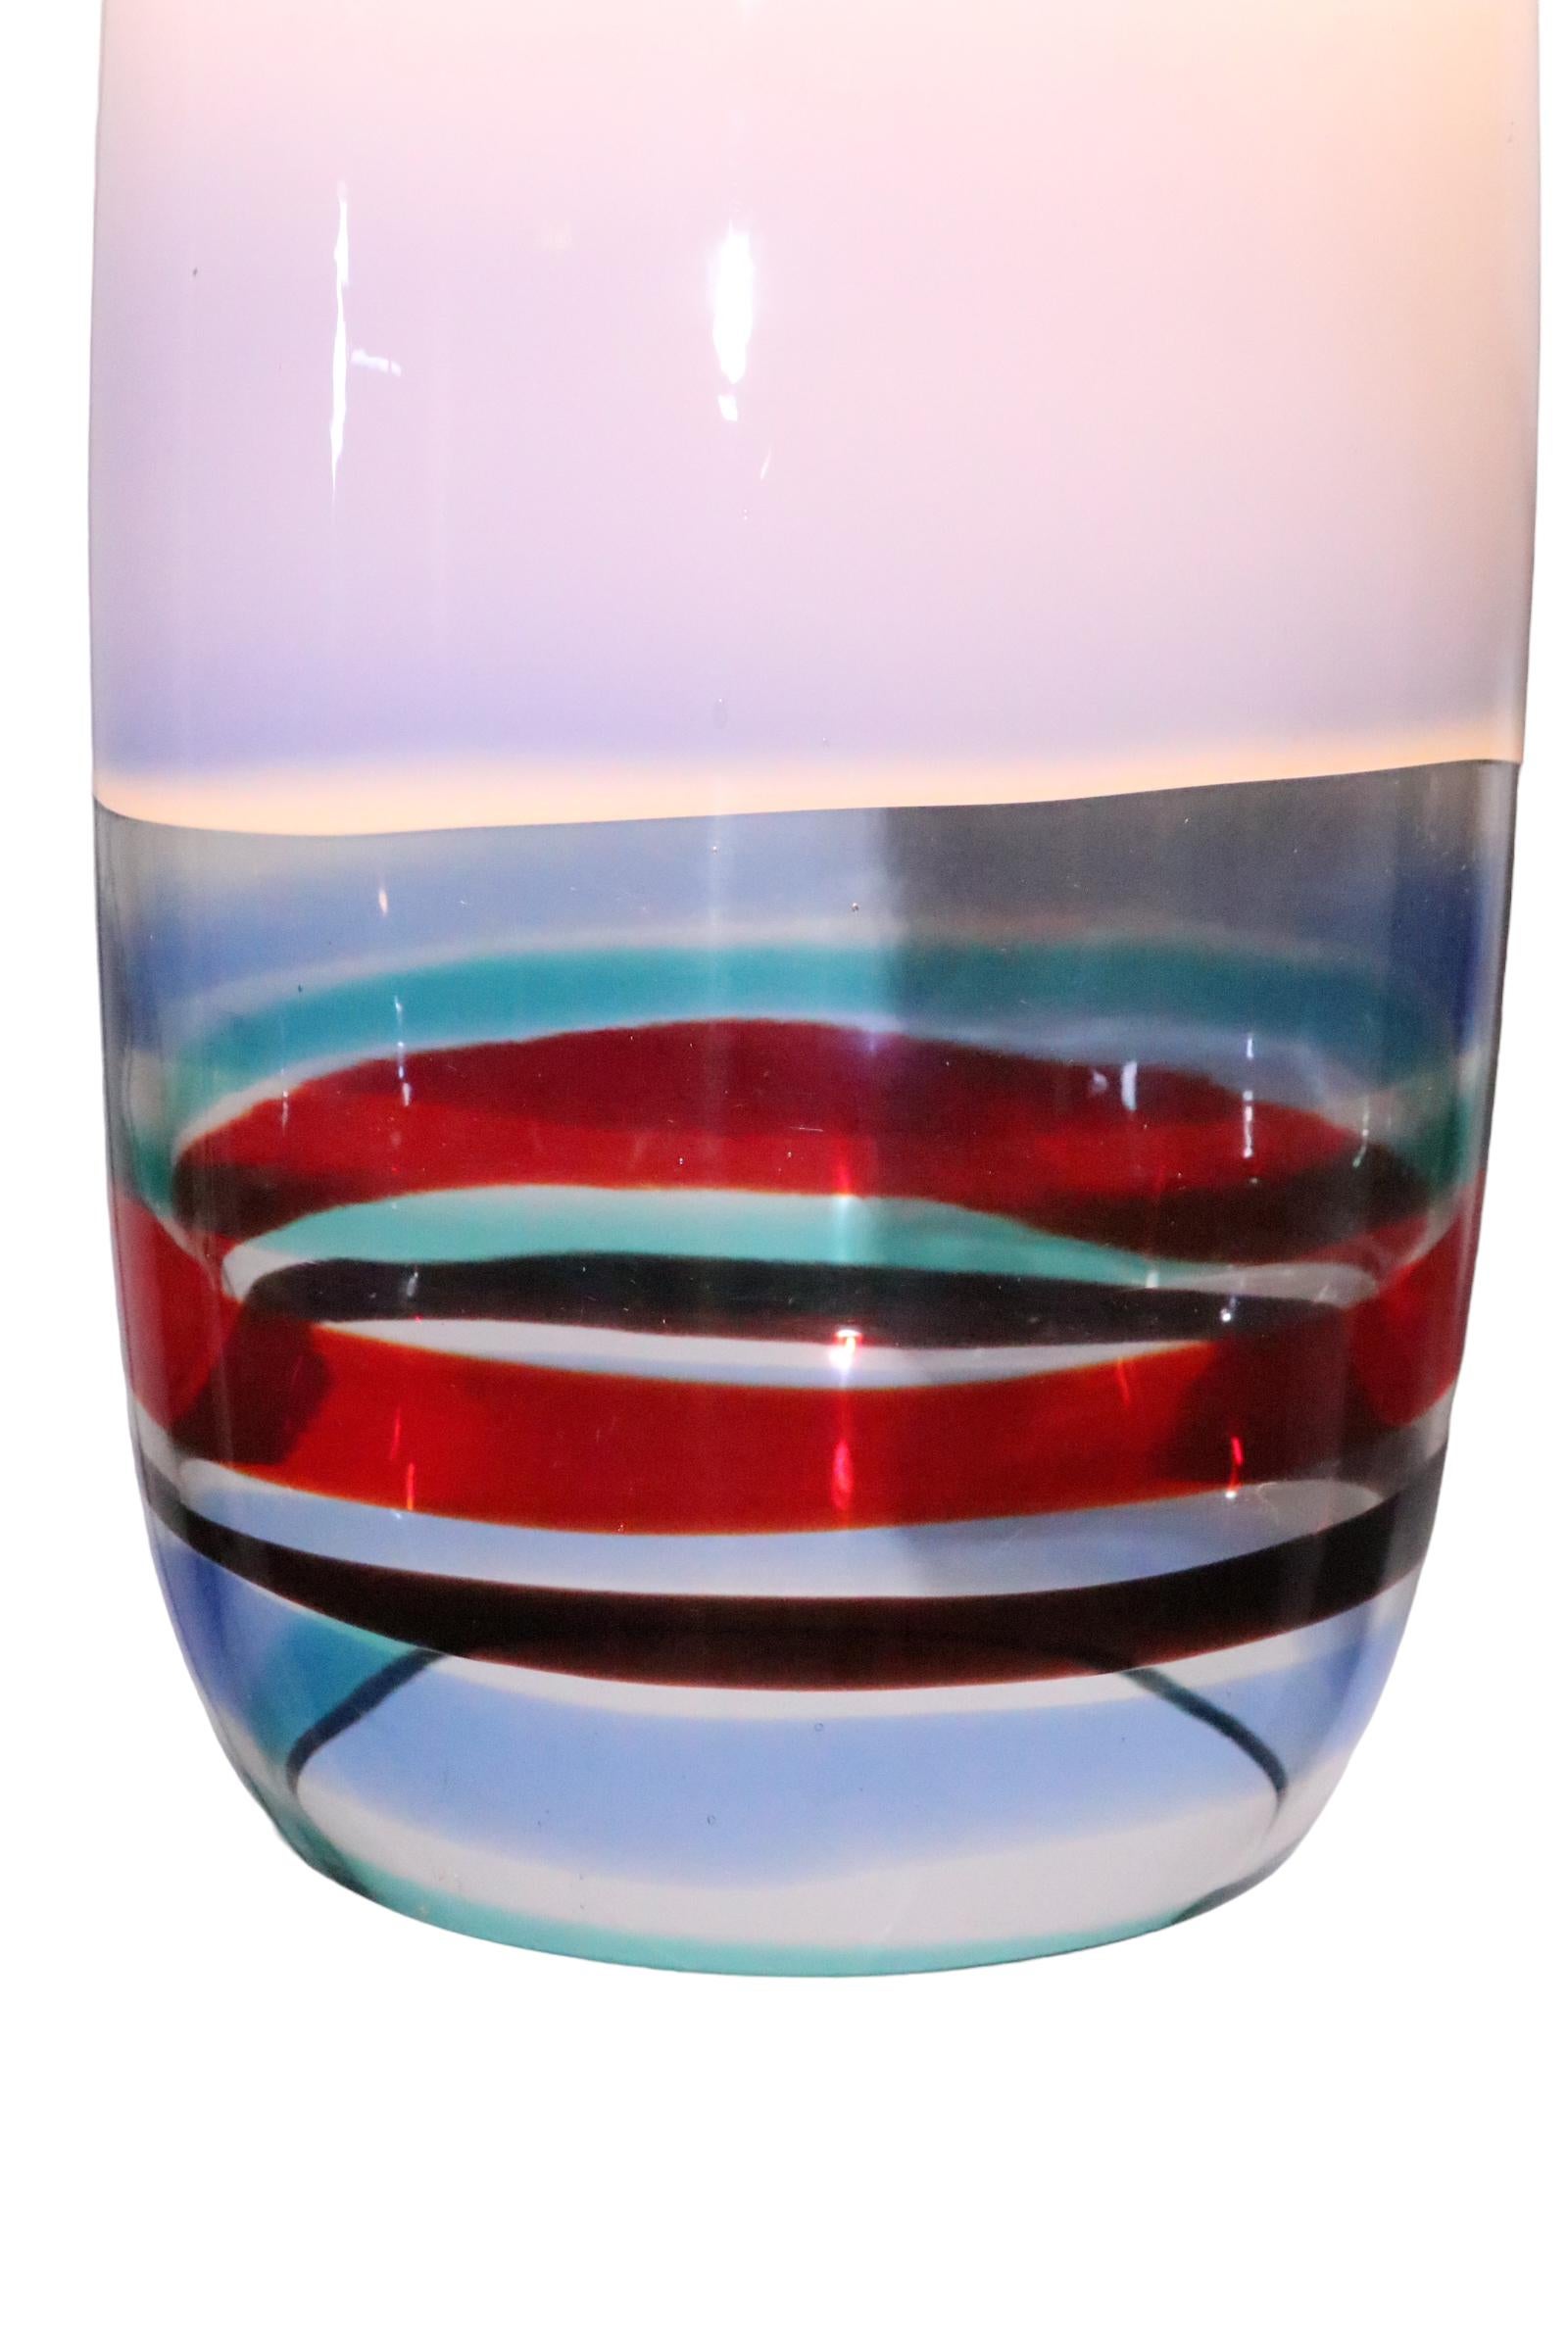 Stunning Massimo Vignelli designed Sigaro pendant shade, made by Venini, circa 1950's. The oblong glass shade has a blue body with a polychrome tip ( like a lit cigar ). This example is in very fine condition, we have had it professionally rewired, 